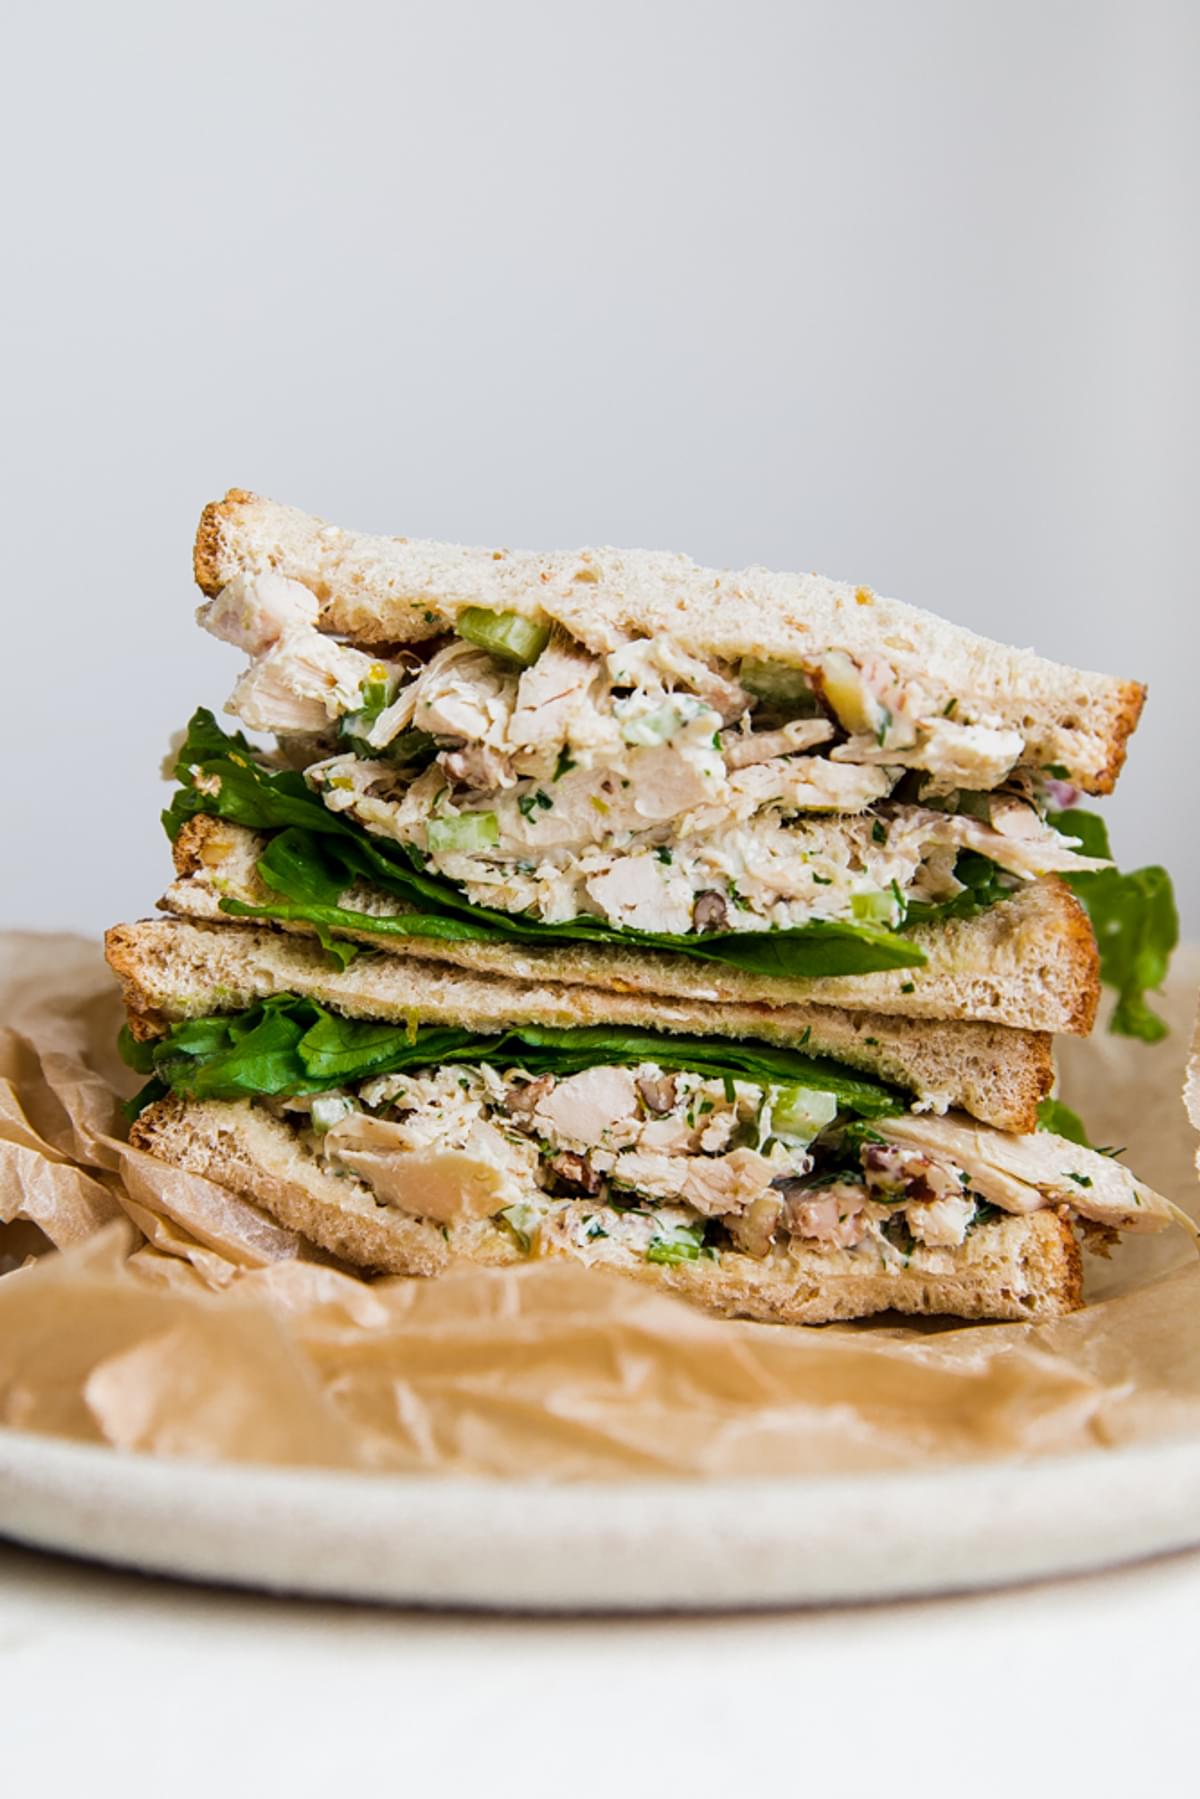 chicken salad recipe made and stacked on a plate with shredded chicken, lettuce, lemon, tarragon